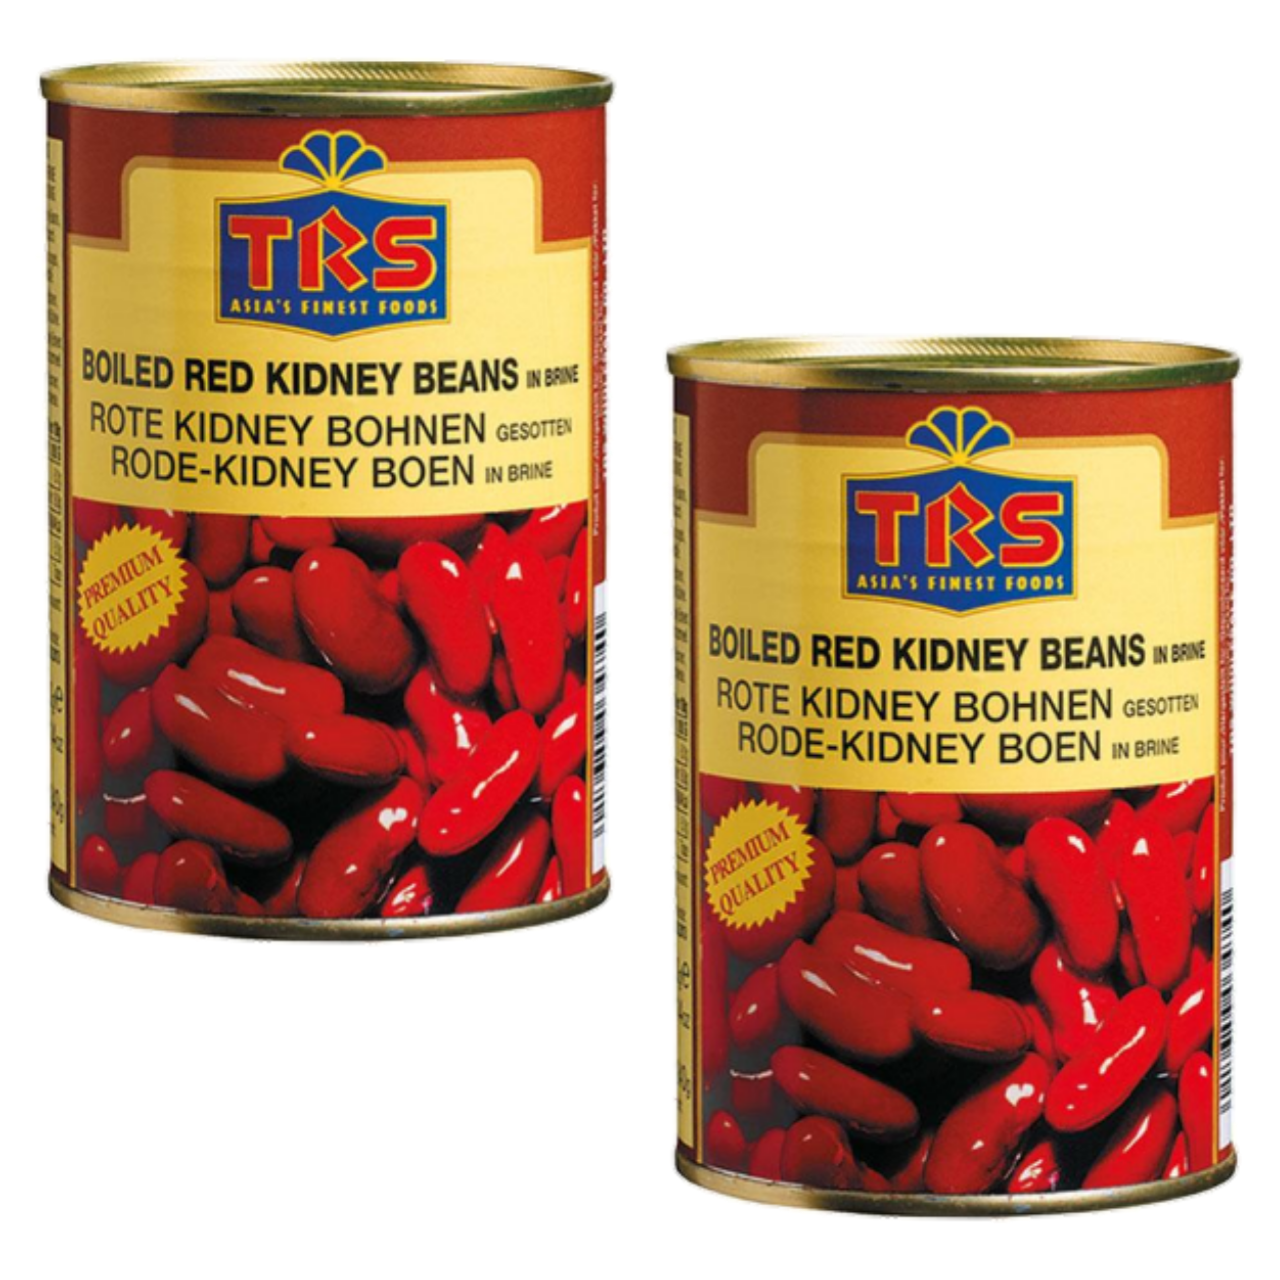 TRS Canned Boiled Red Kidney Beans (Bundle of 2 x 400g)